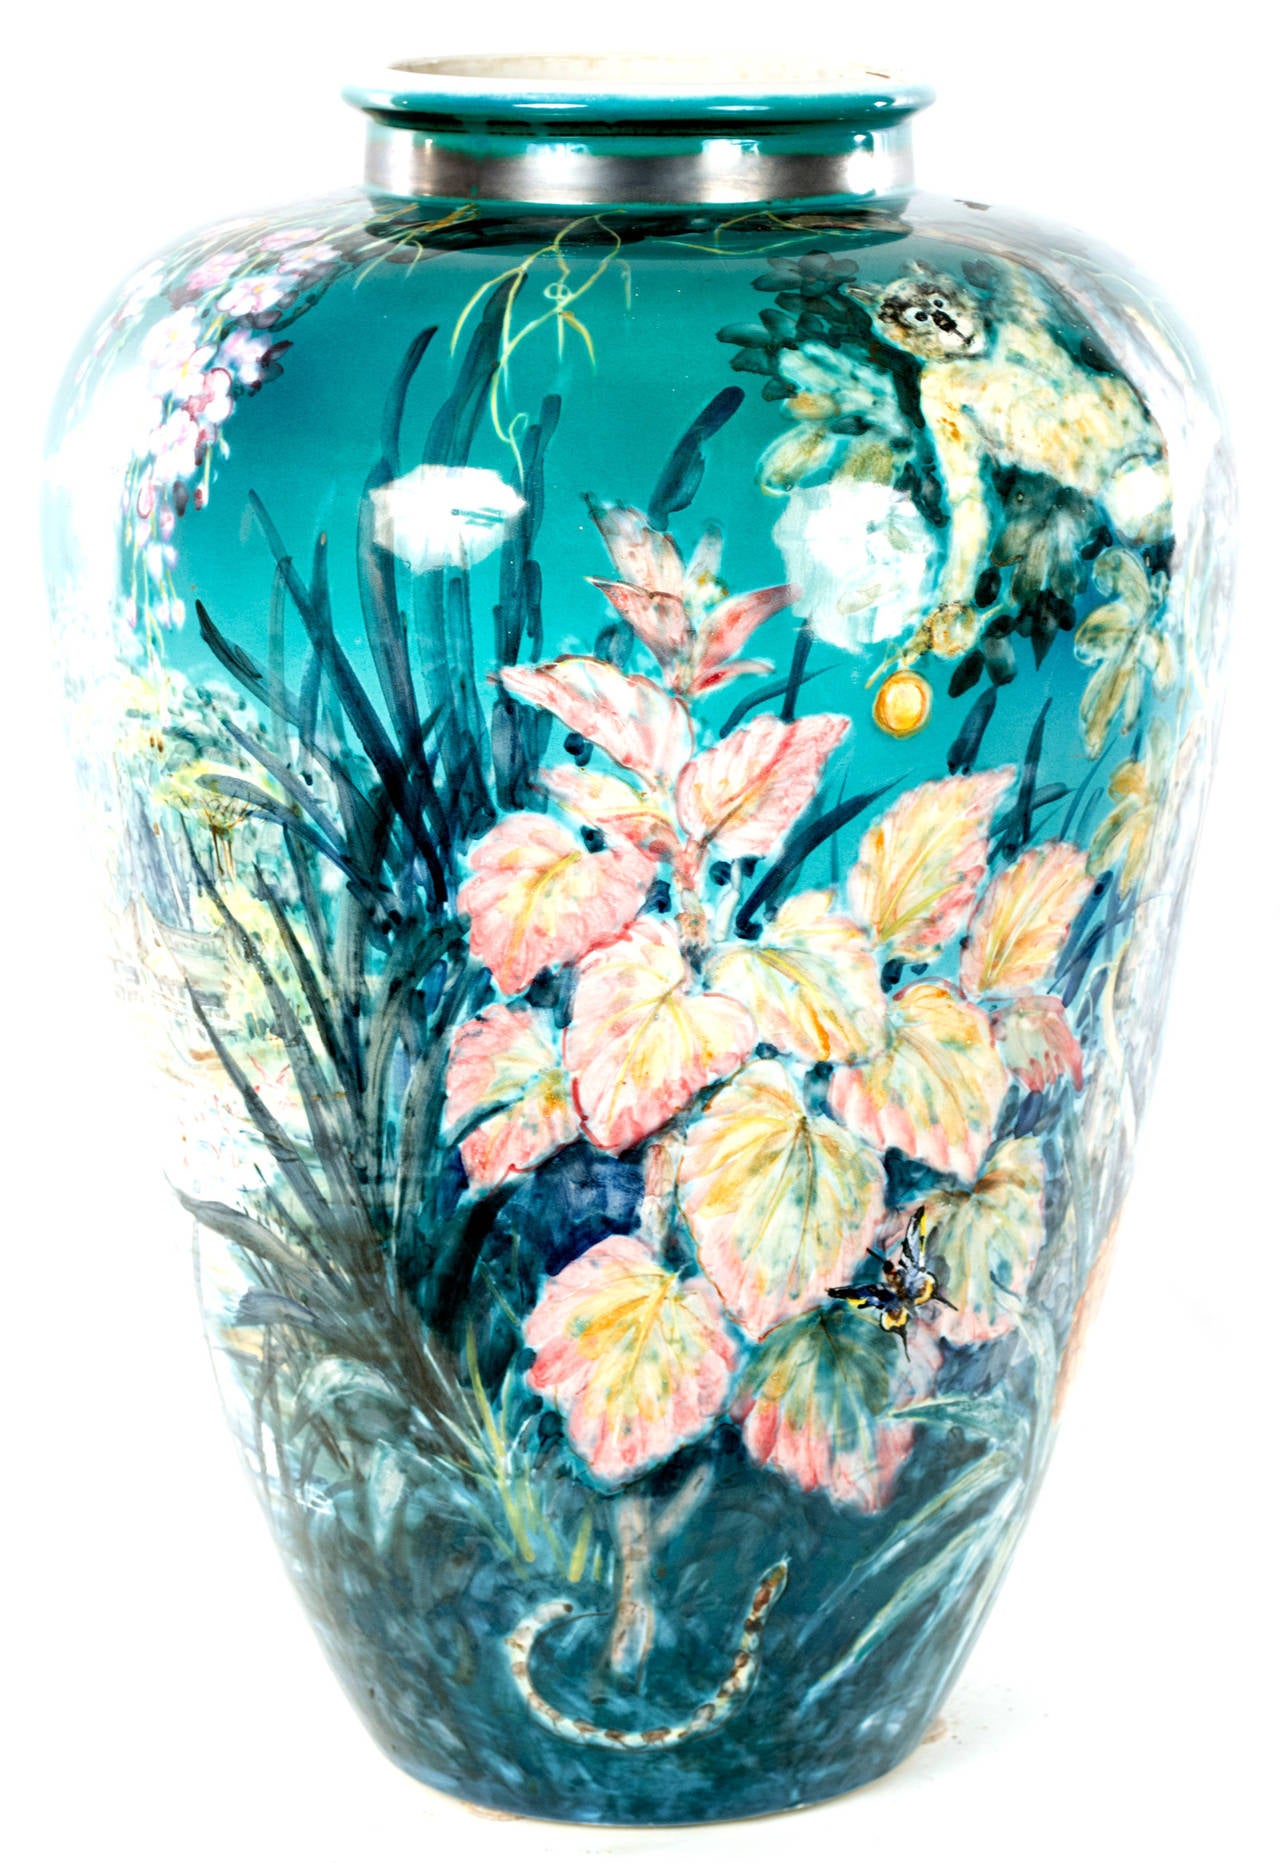 Featuring a painted tropical (i.e. South Pacific) scene with exotic fruits, animals, ocean, and huts. The baluster vase was made by the German company Ulmer Keramik, which was established in Bohemia after World War II. The firm was known for a